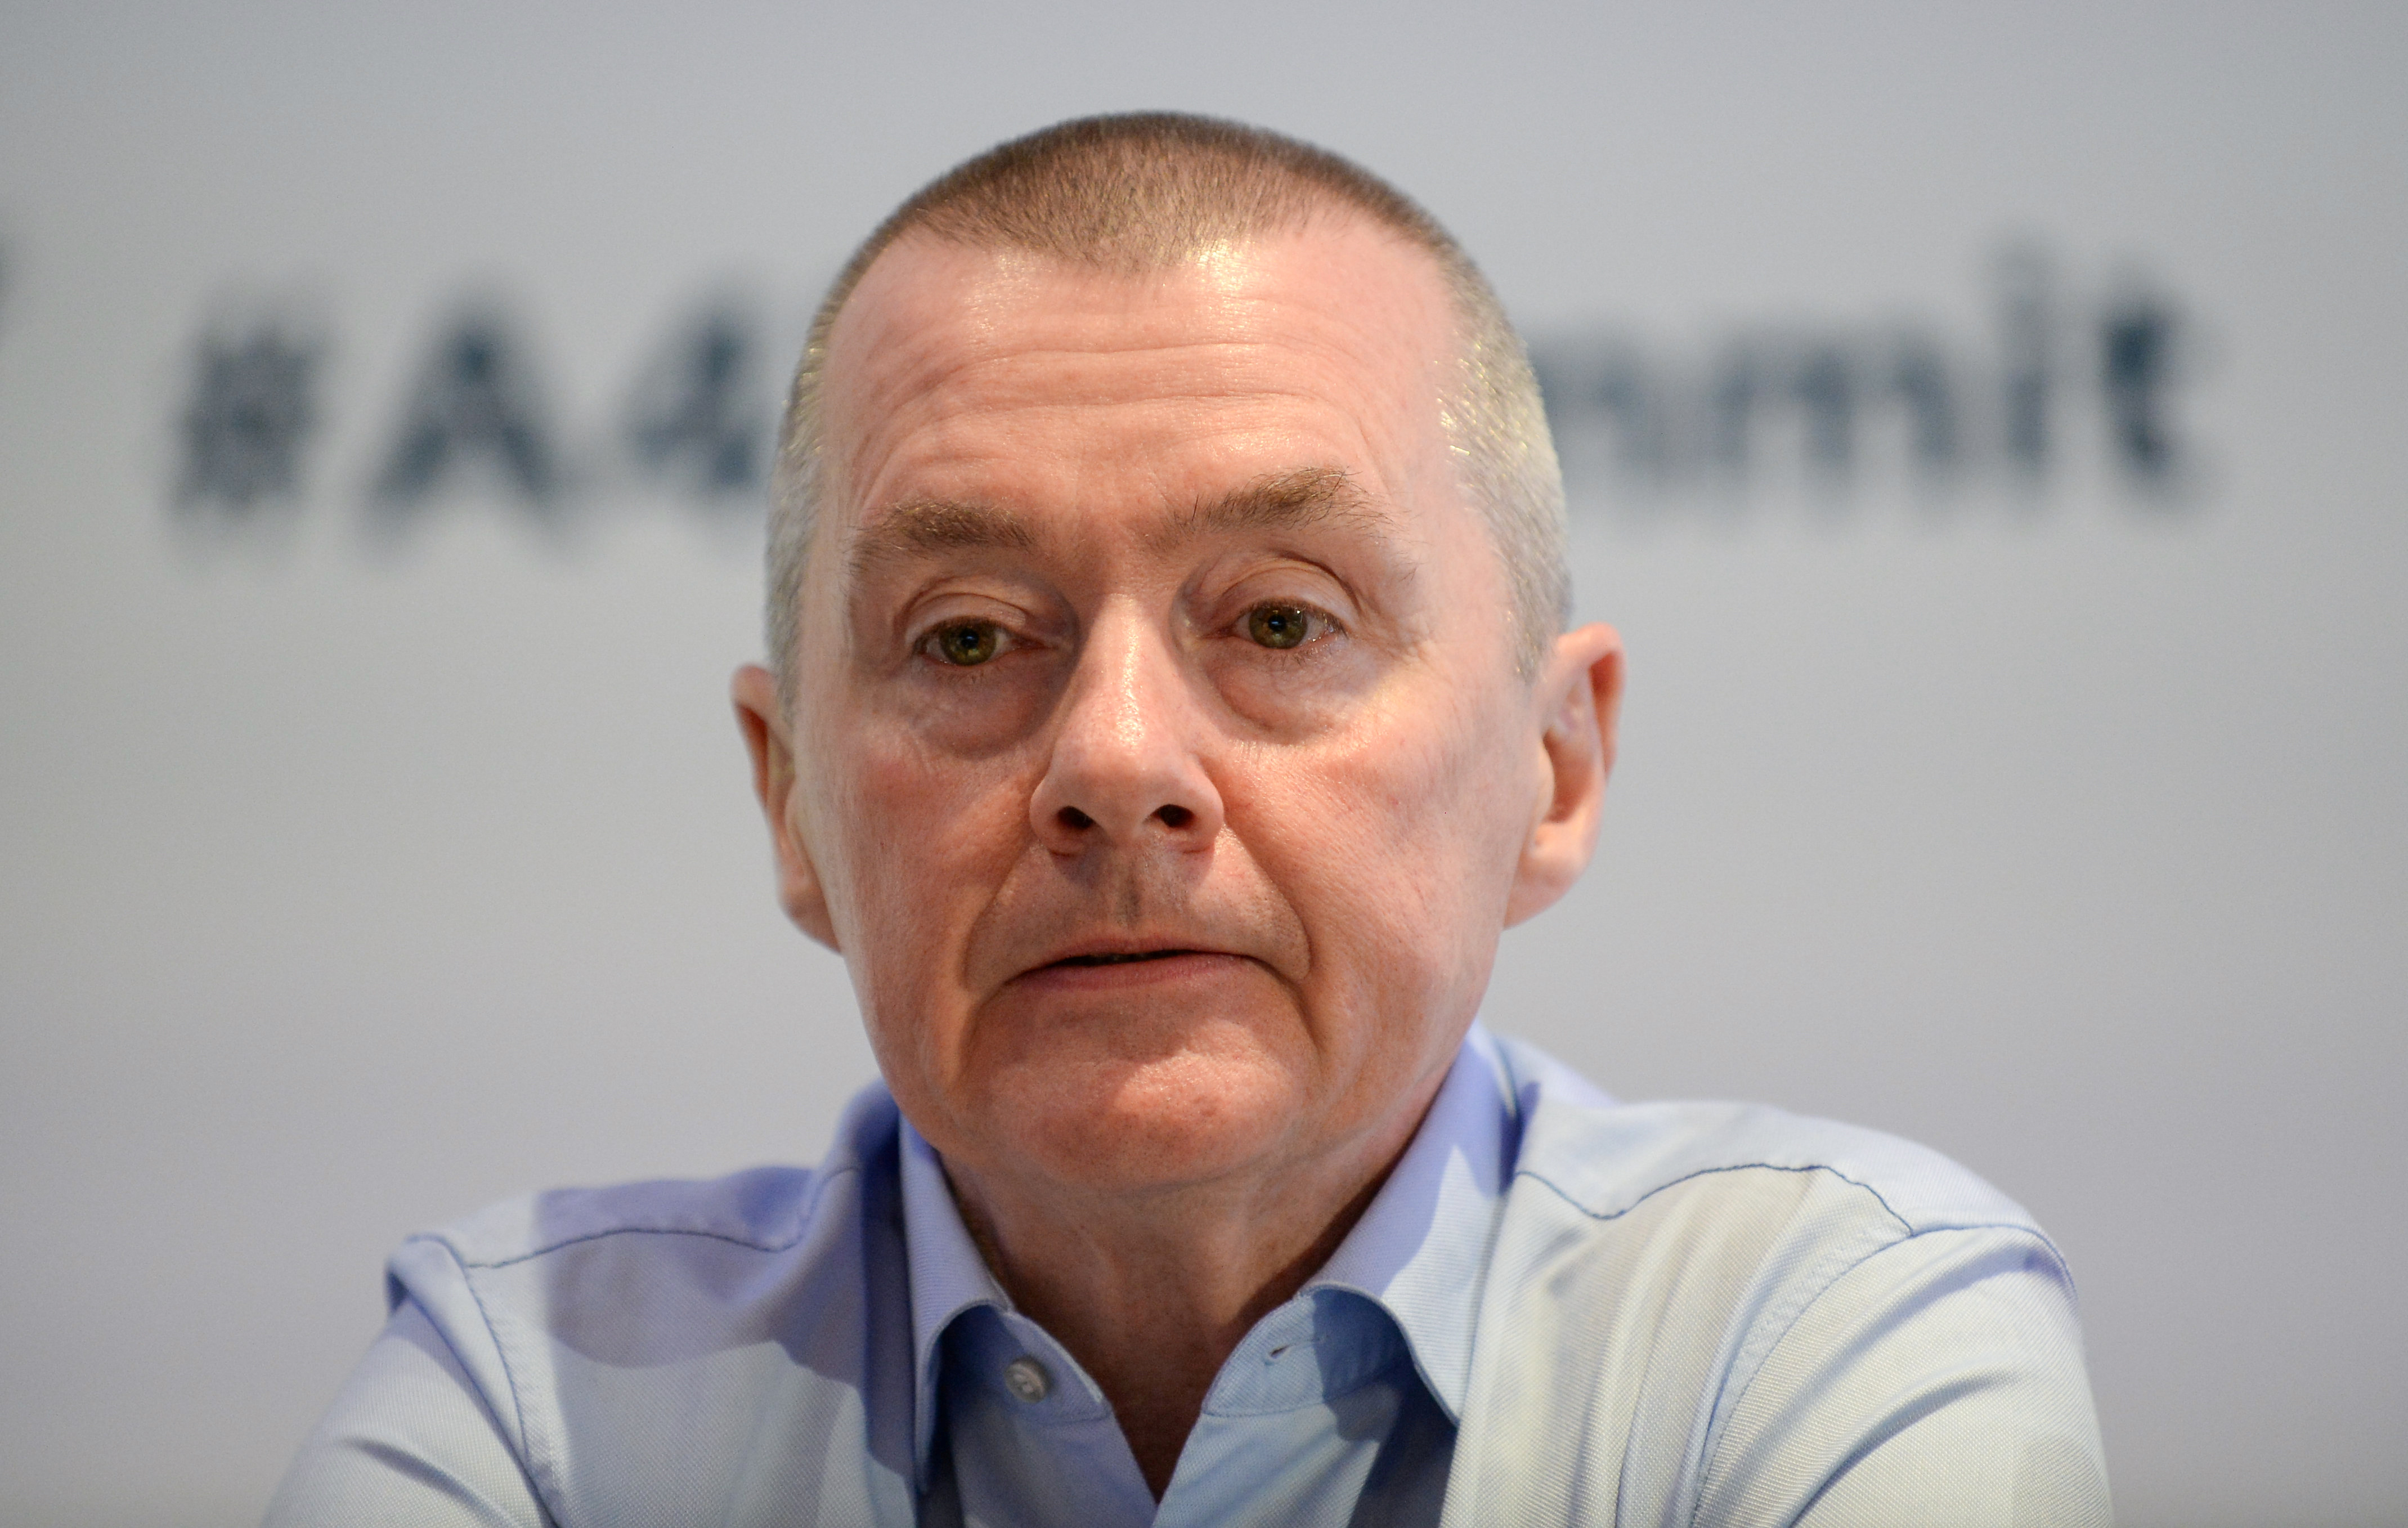 Willie Walsh Chief Executive of International Airlines Group (IAG) attends the Europe Aviation Summit in Brussels